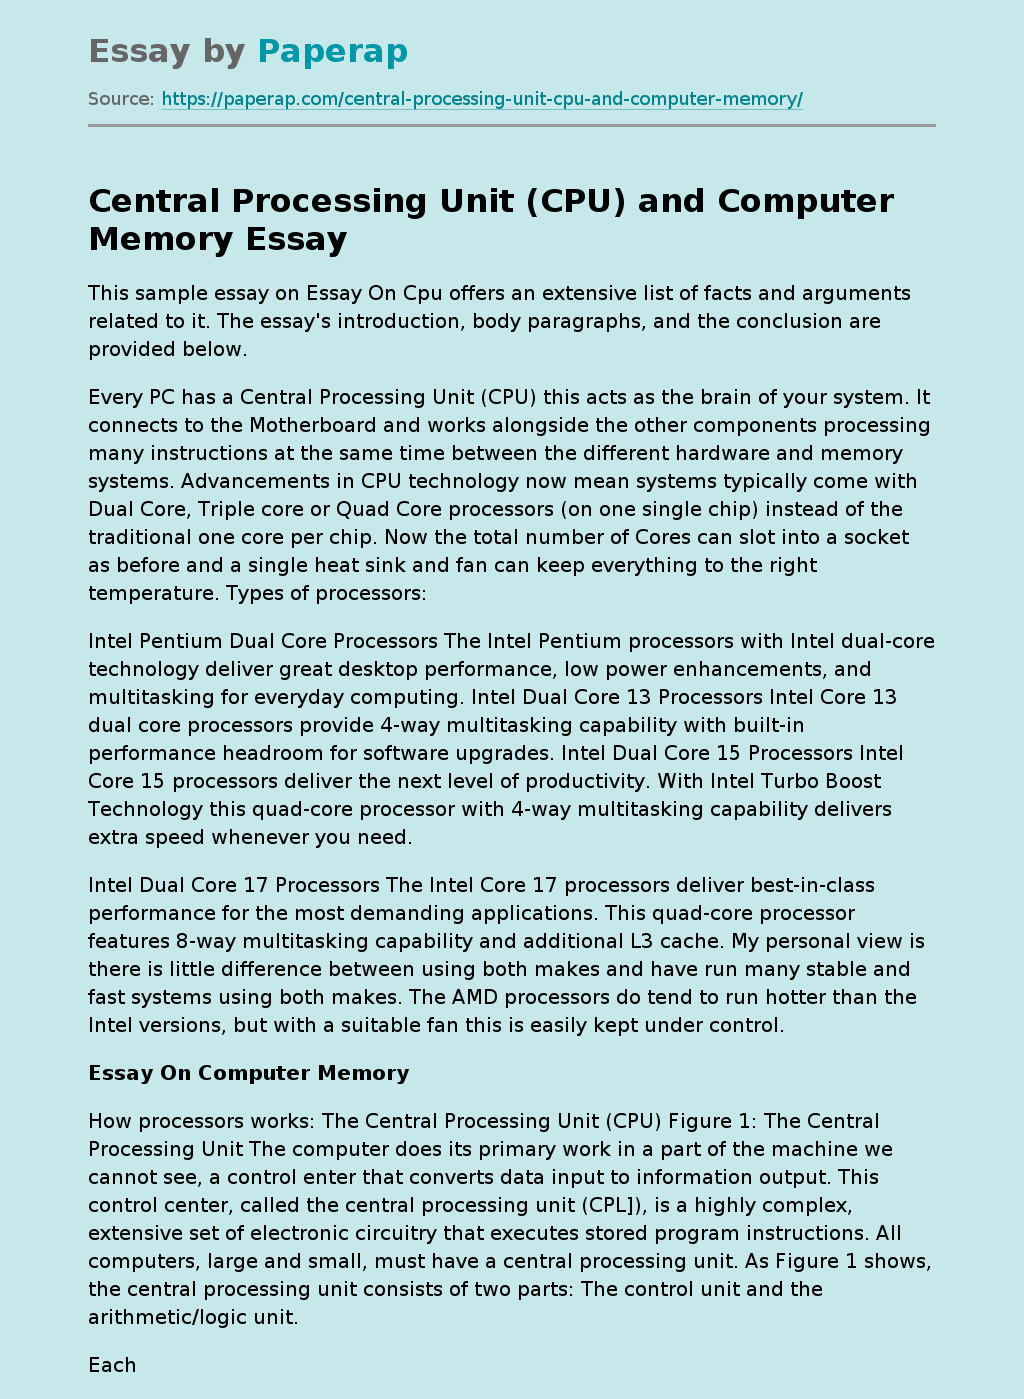 Central Processing Unit (CPU) and Computer Memory